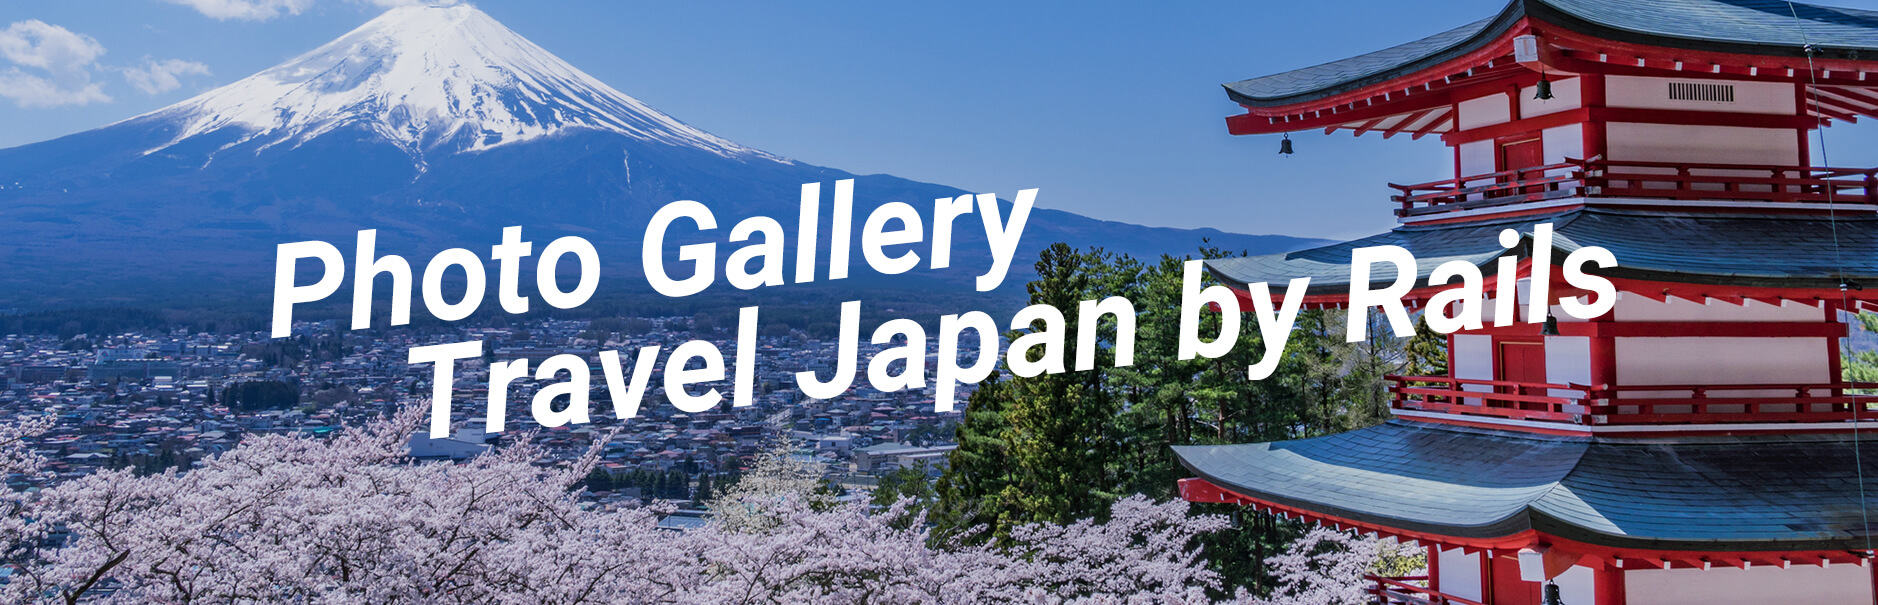 Photo Gallery Travel Japan by Rails